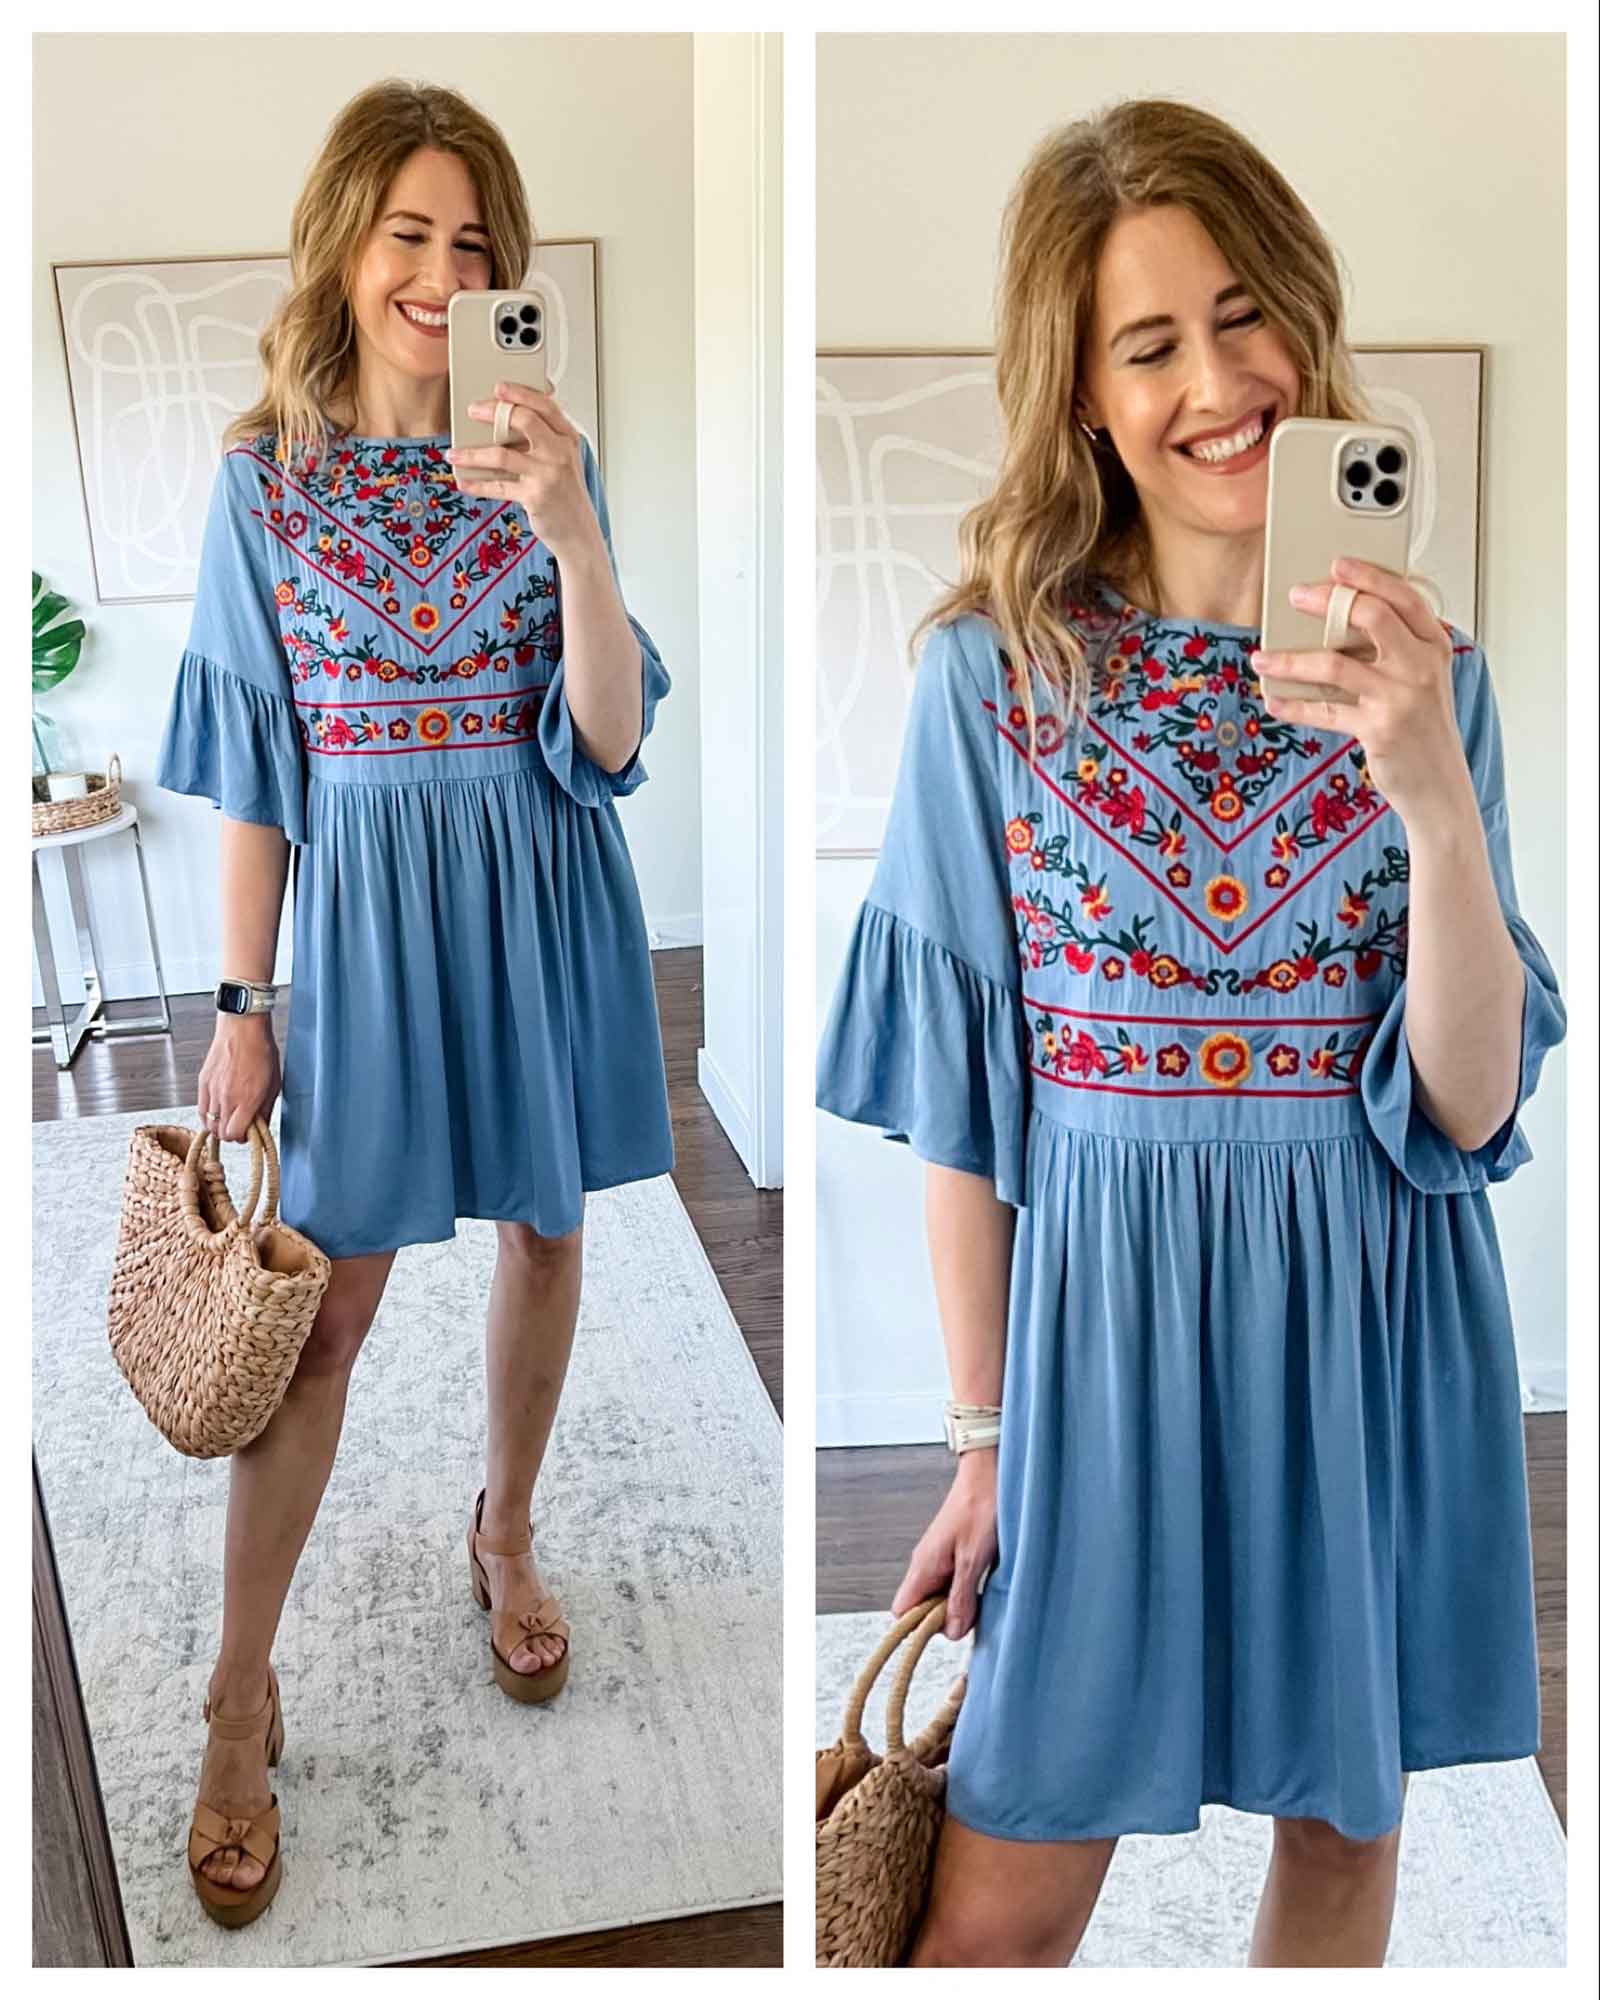 Summer casual dresses from Amazon